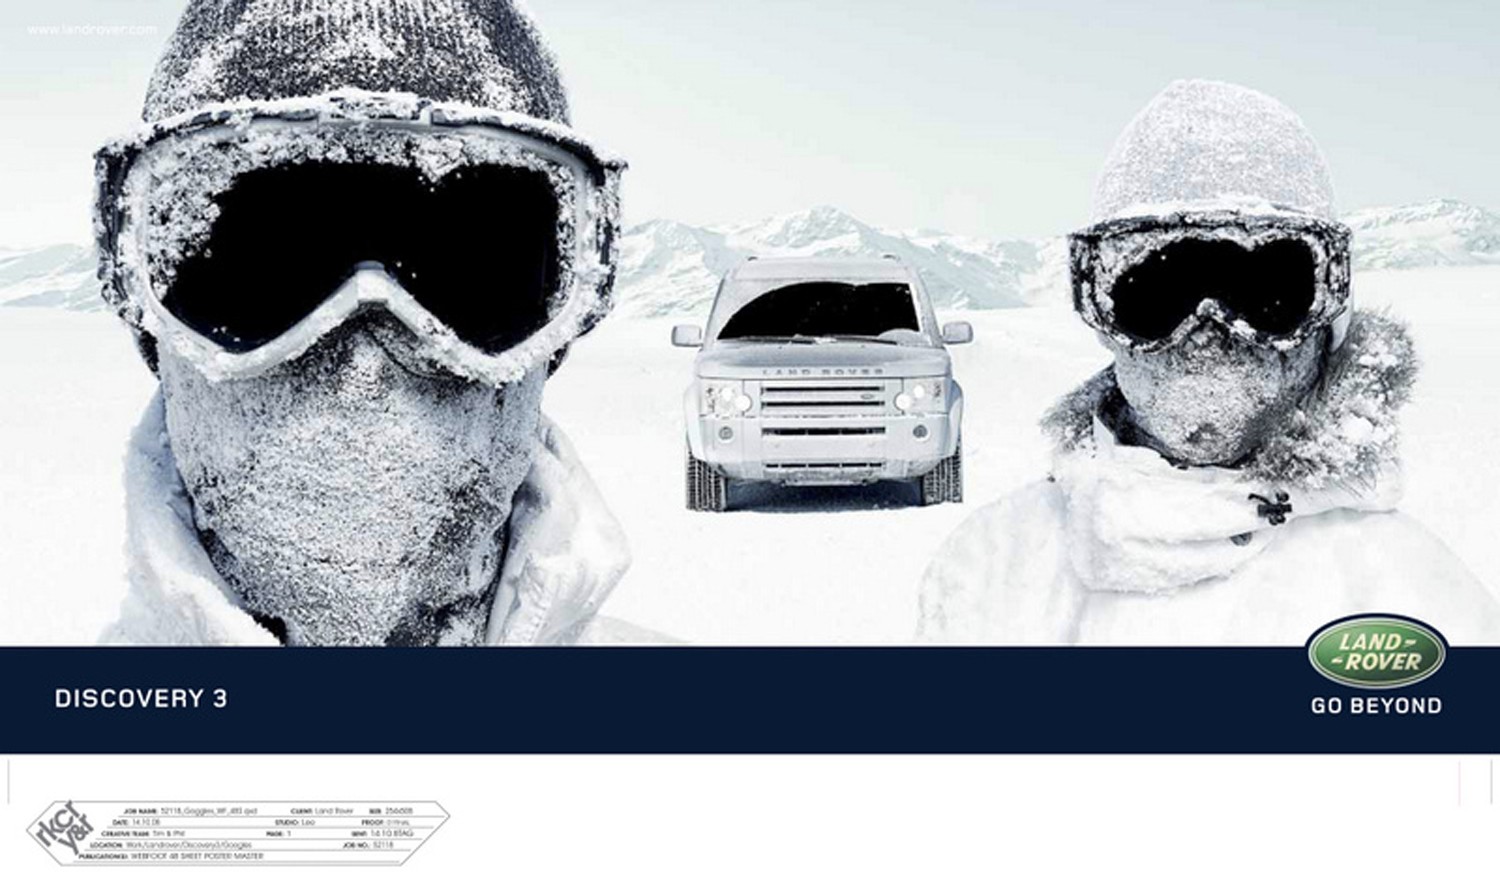 Land Rover Advert, Artificial Snow for Advertising UK, Eco Friendly Fake Snow UK, FX Live